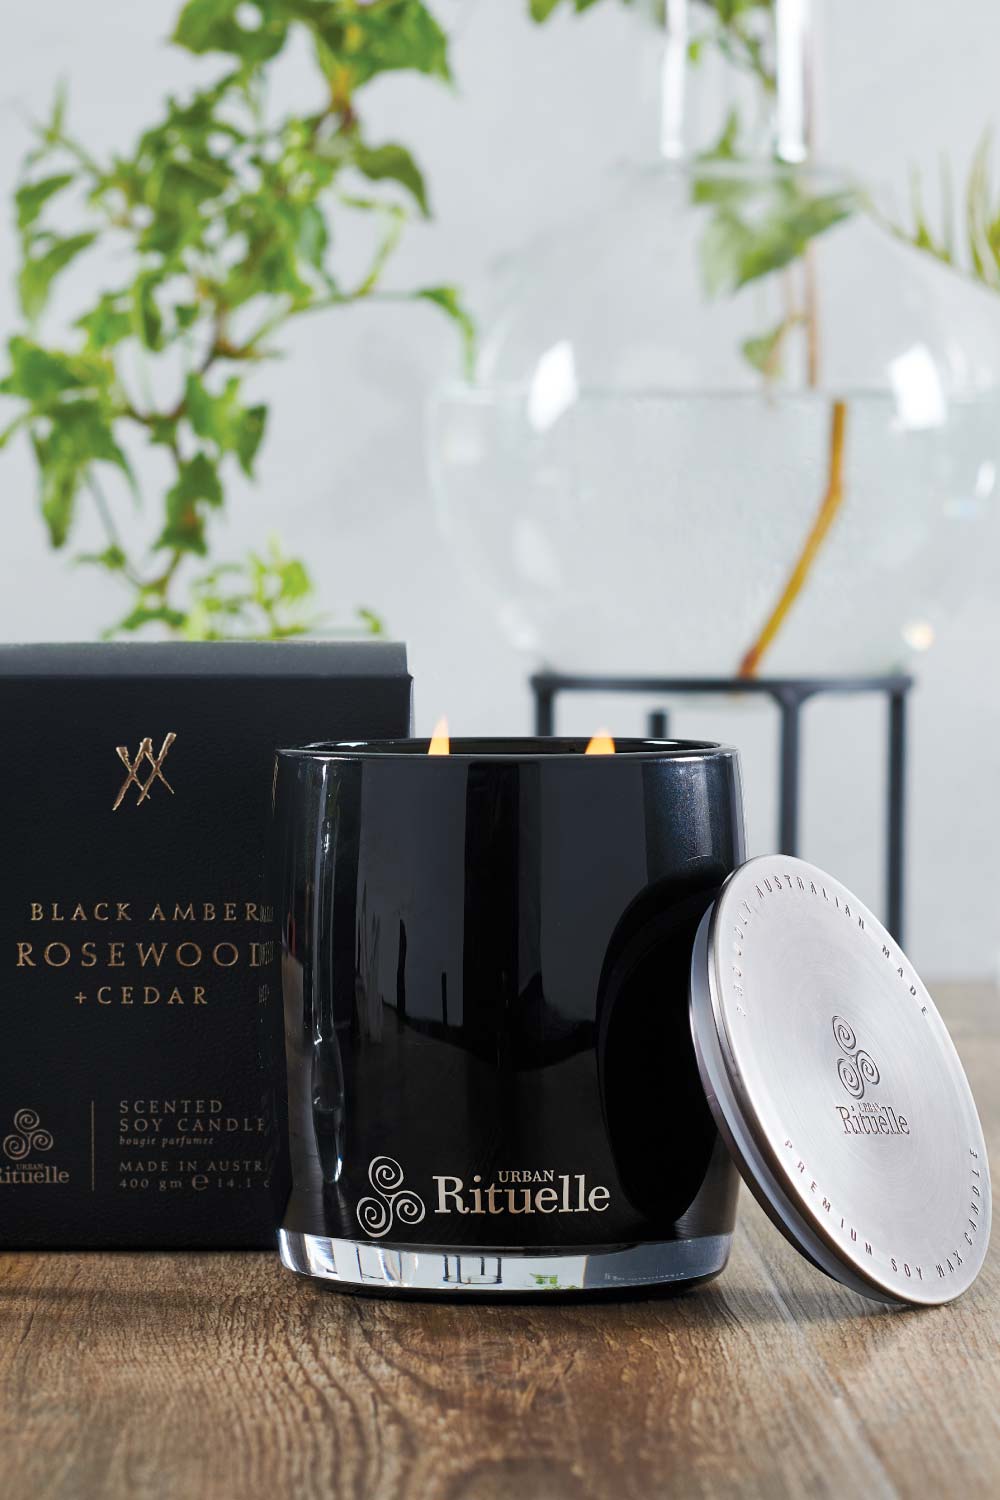 Beat the Chill! Our Top 3 Scented Soy Candles for Winter